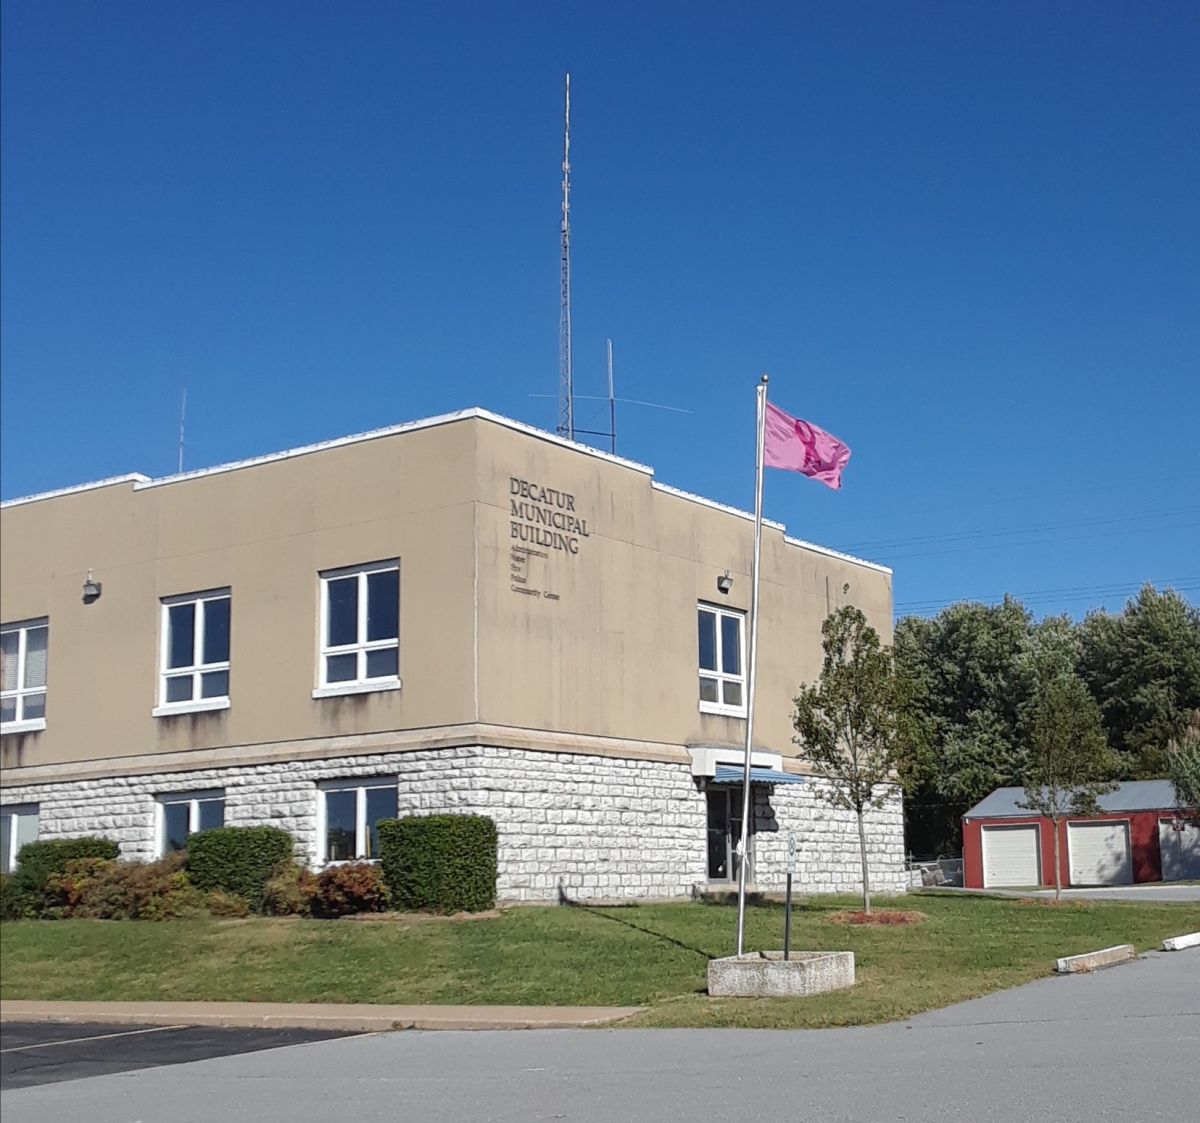 This building is an old school that was built by the WPA in 1938. It is now the city hall where you will find Mayor Bob Tharp, and City Clerk Kim Wilkins. To Speak to either of them call 479-752-3912 ext. 4